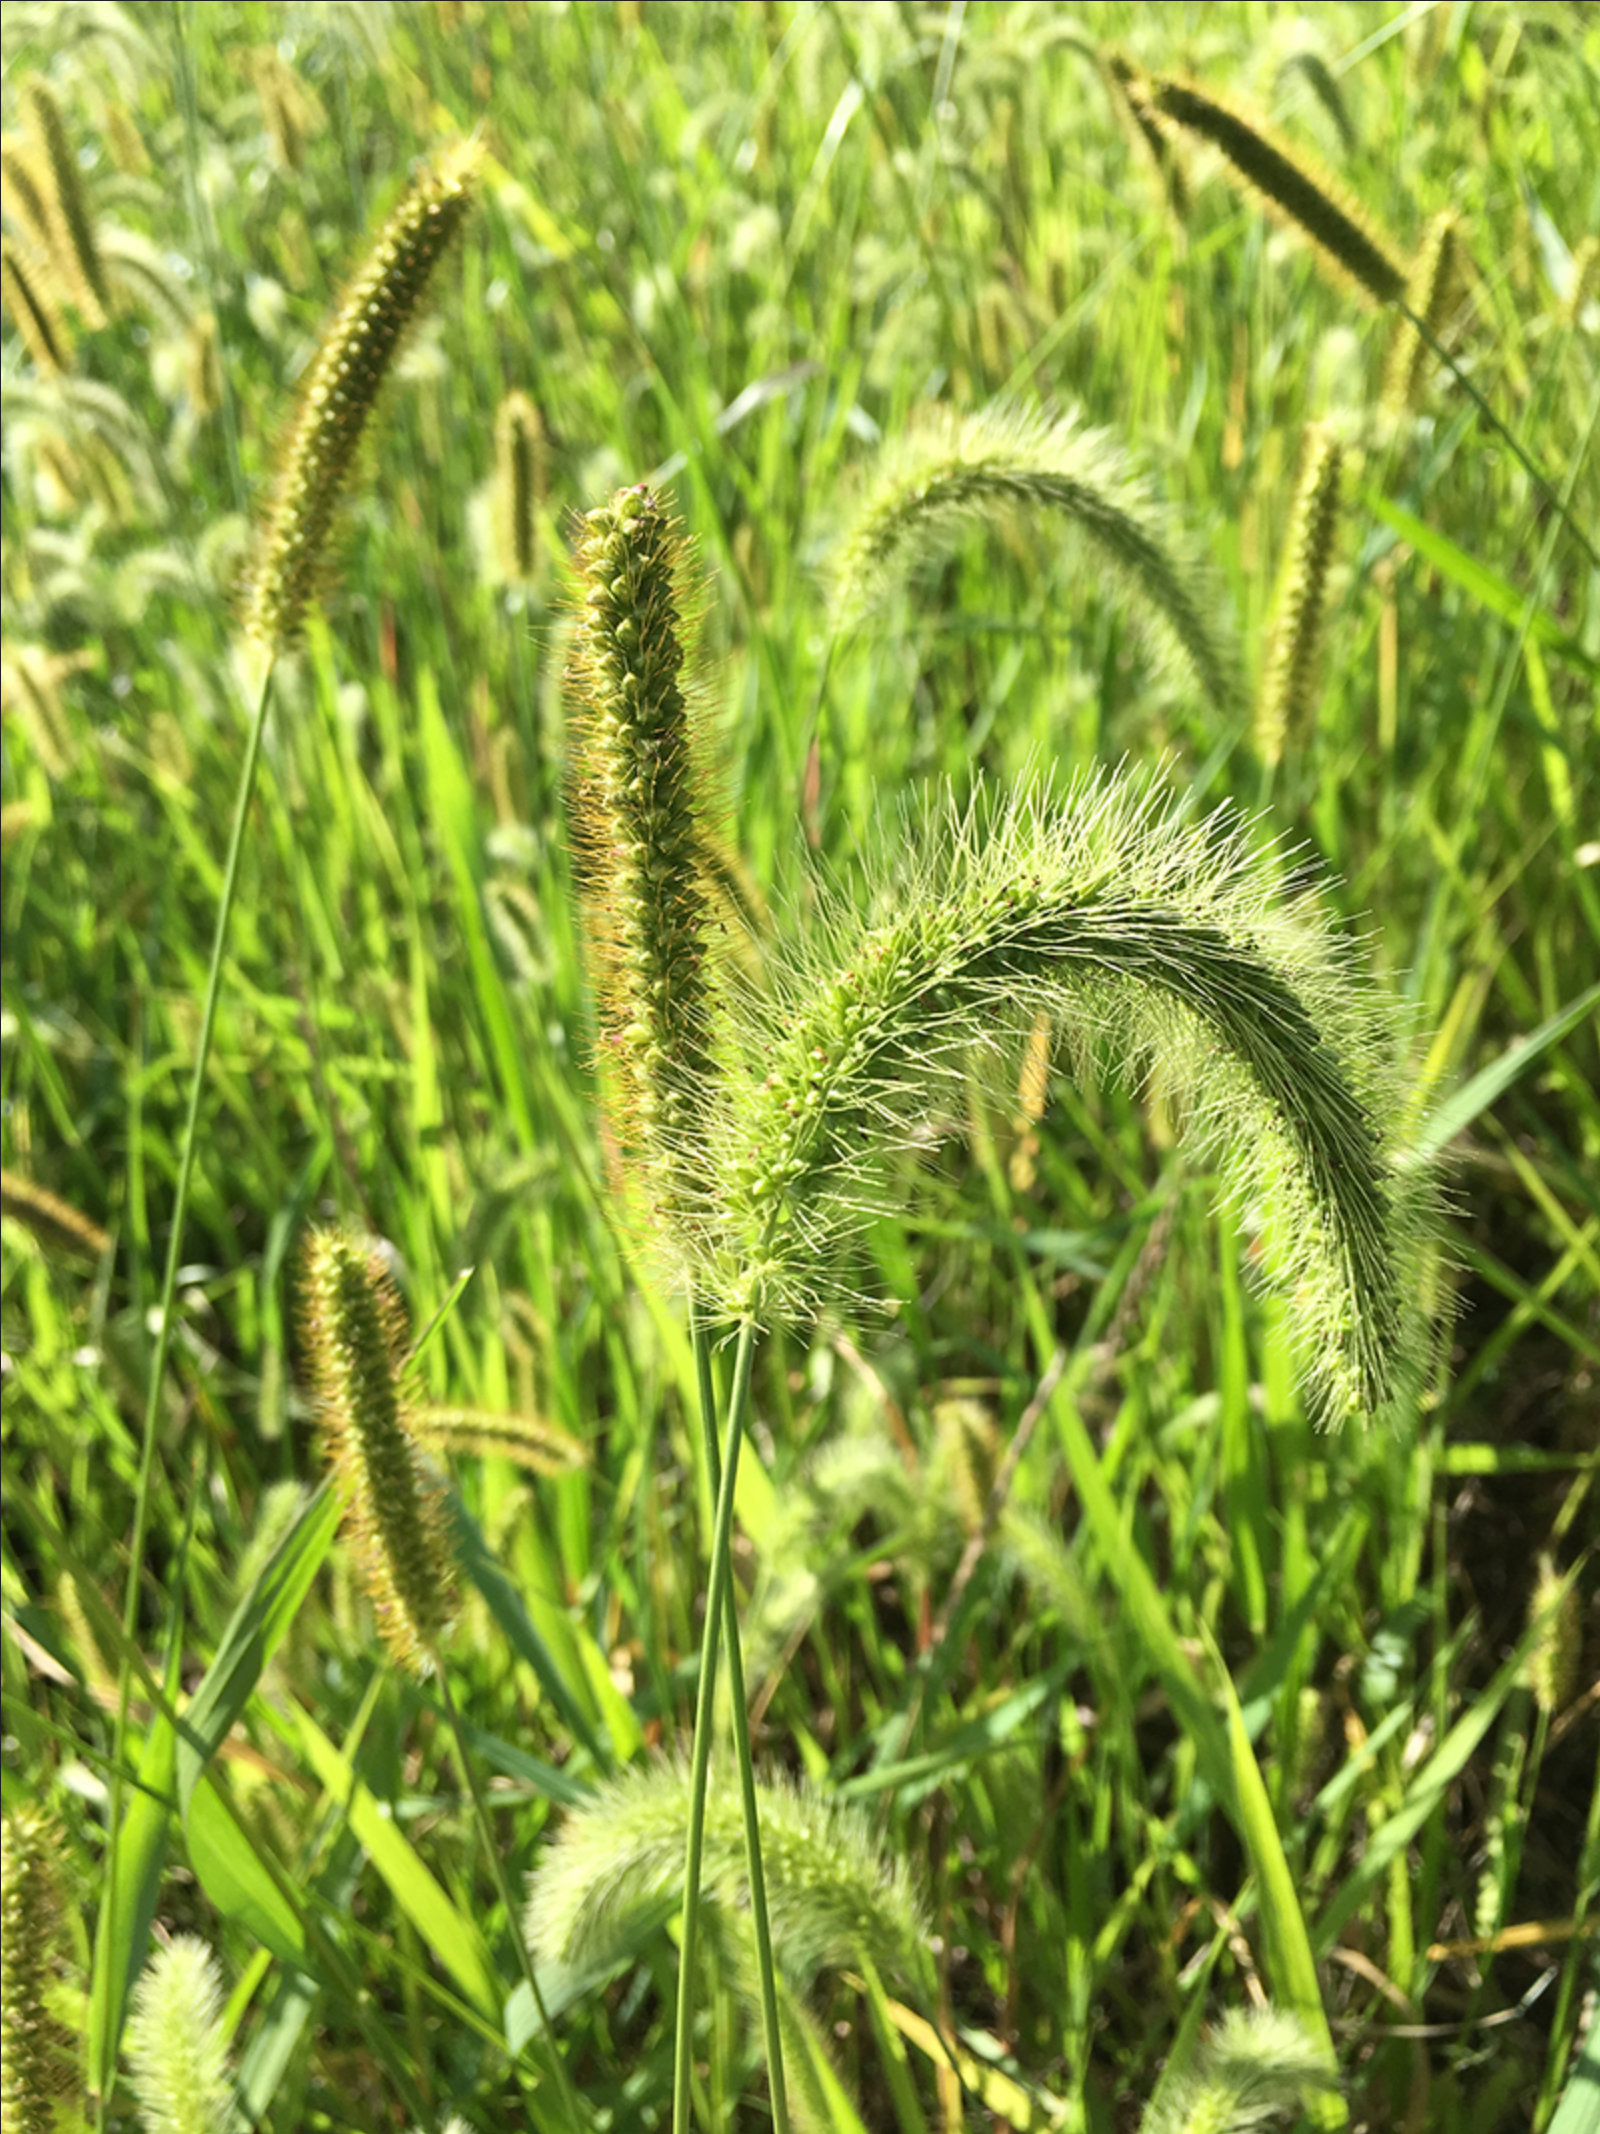 Giant and yellow foxtail seedheads side-by-side.